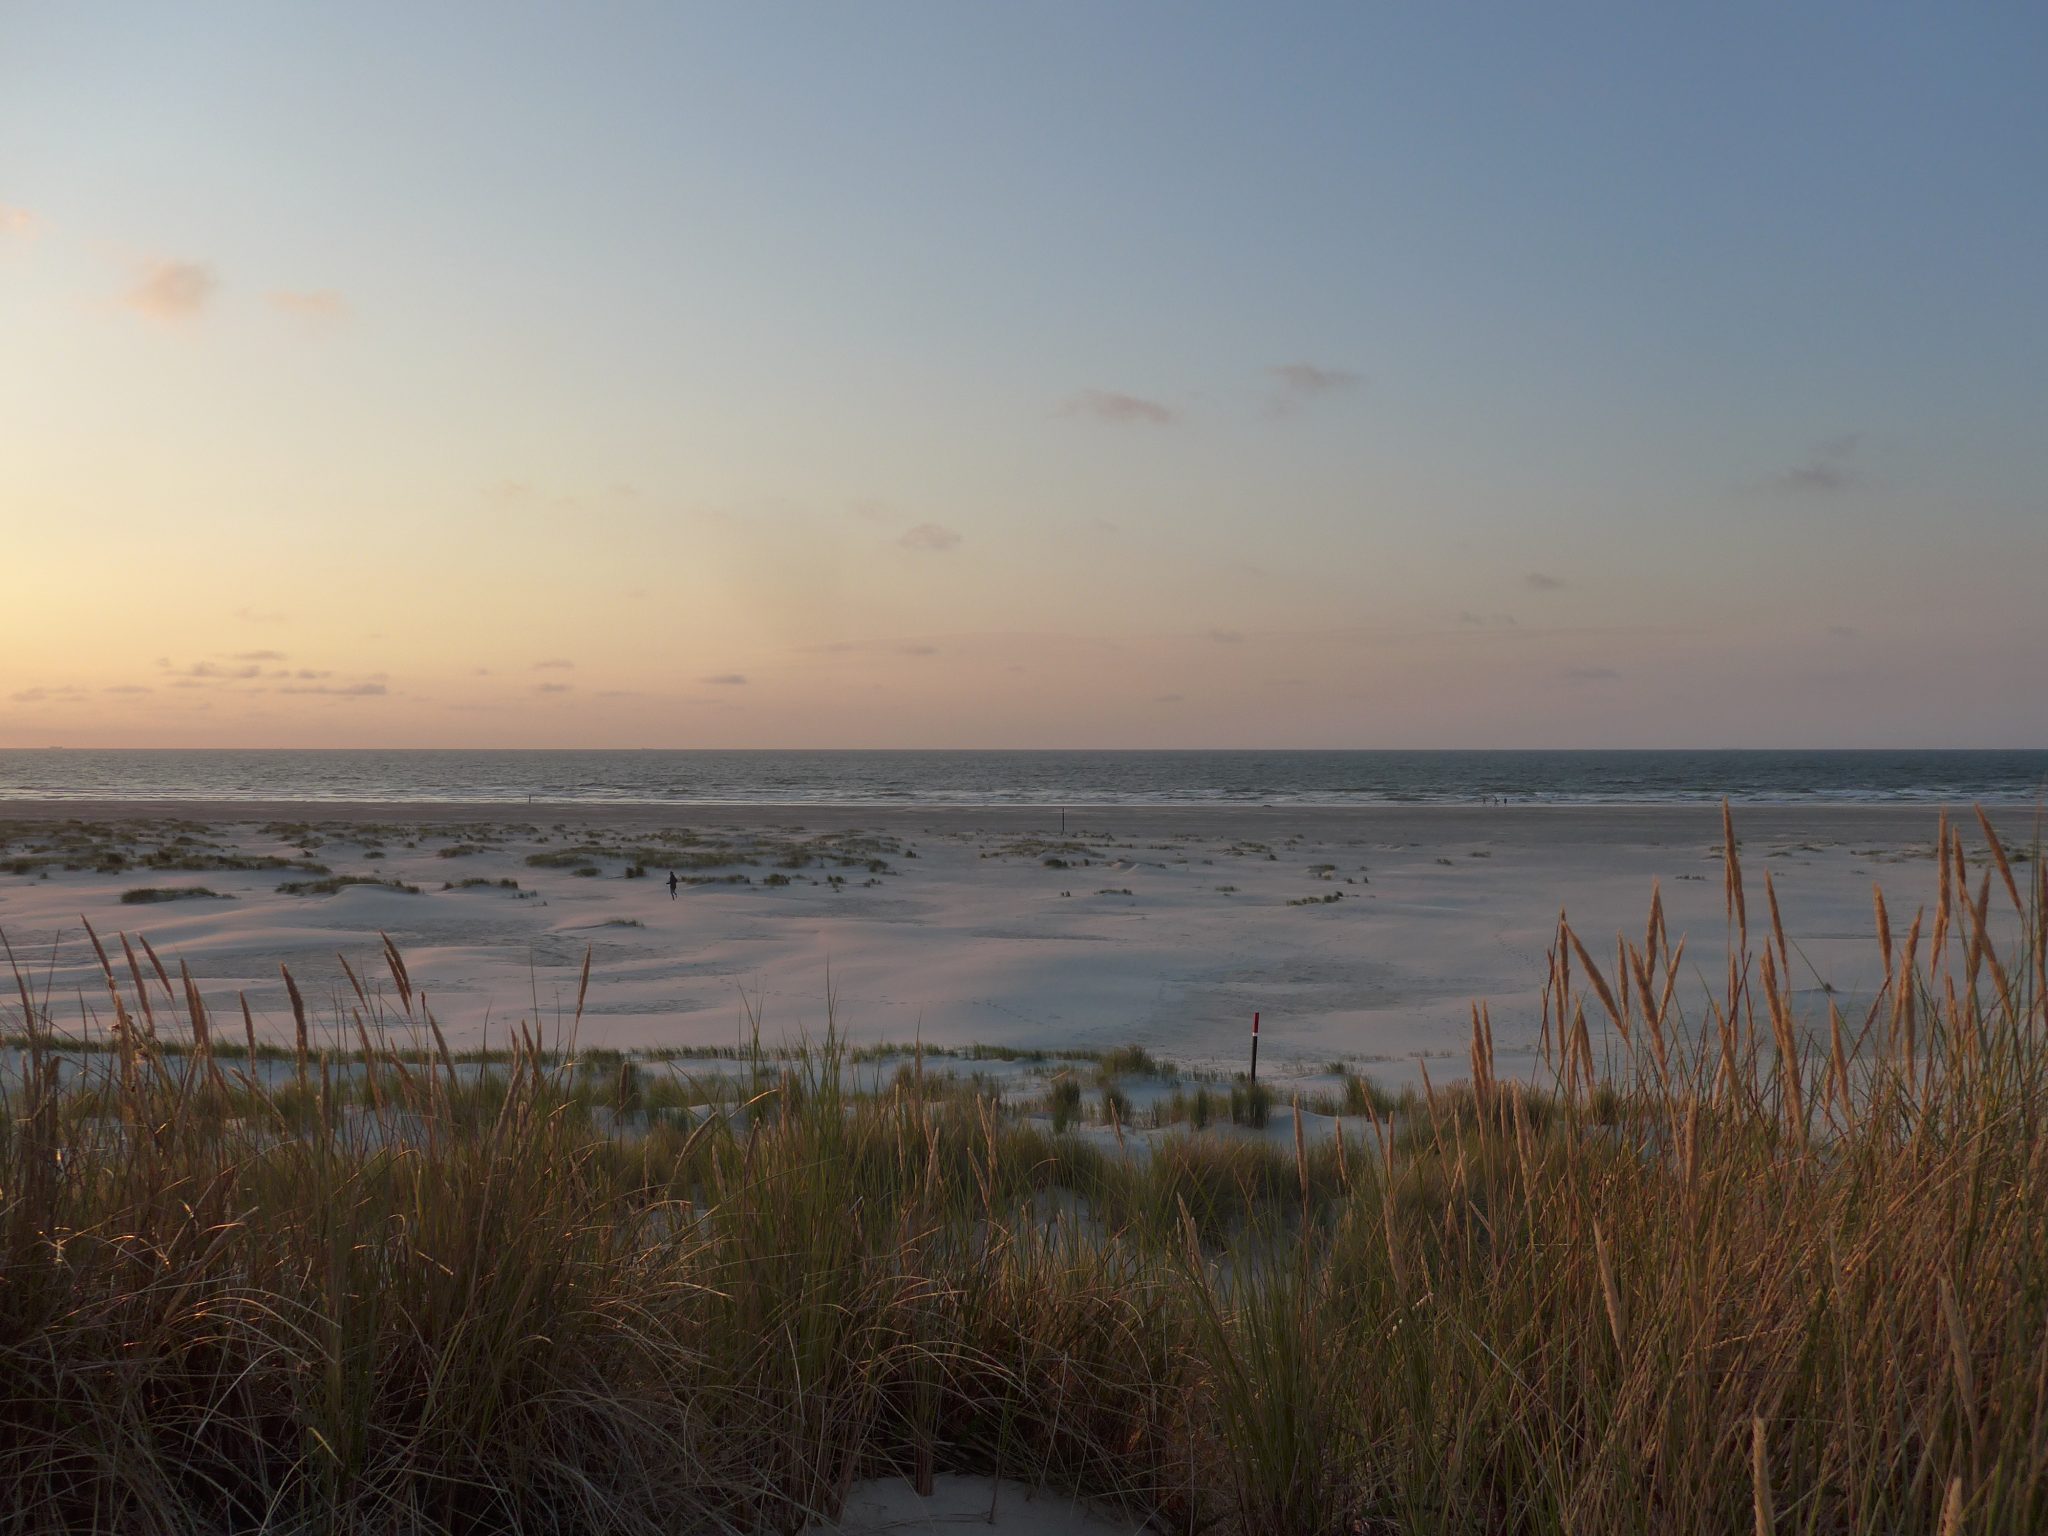 Dunes, beach and sea during sunset on Terschelling, Netherlands. WorldPhotographyDay22